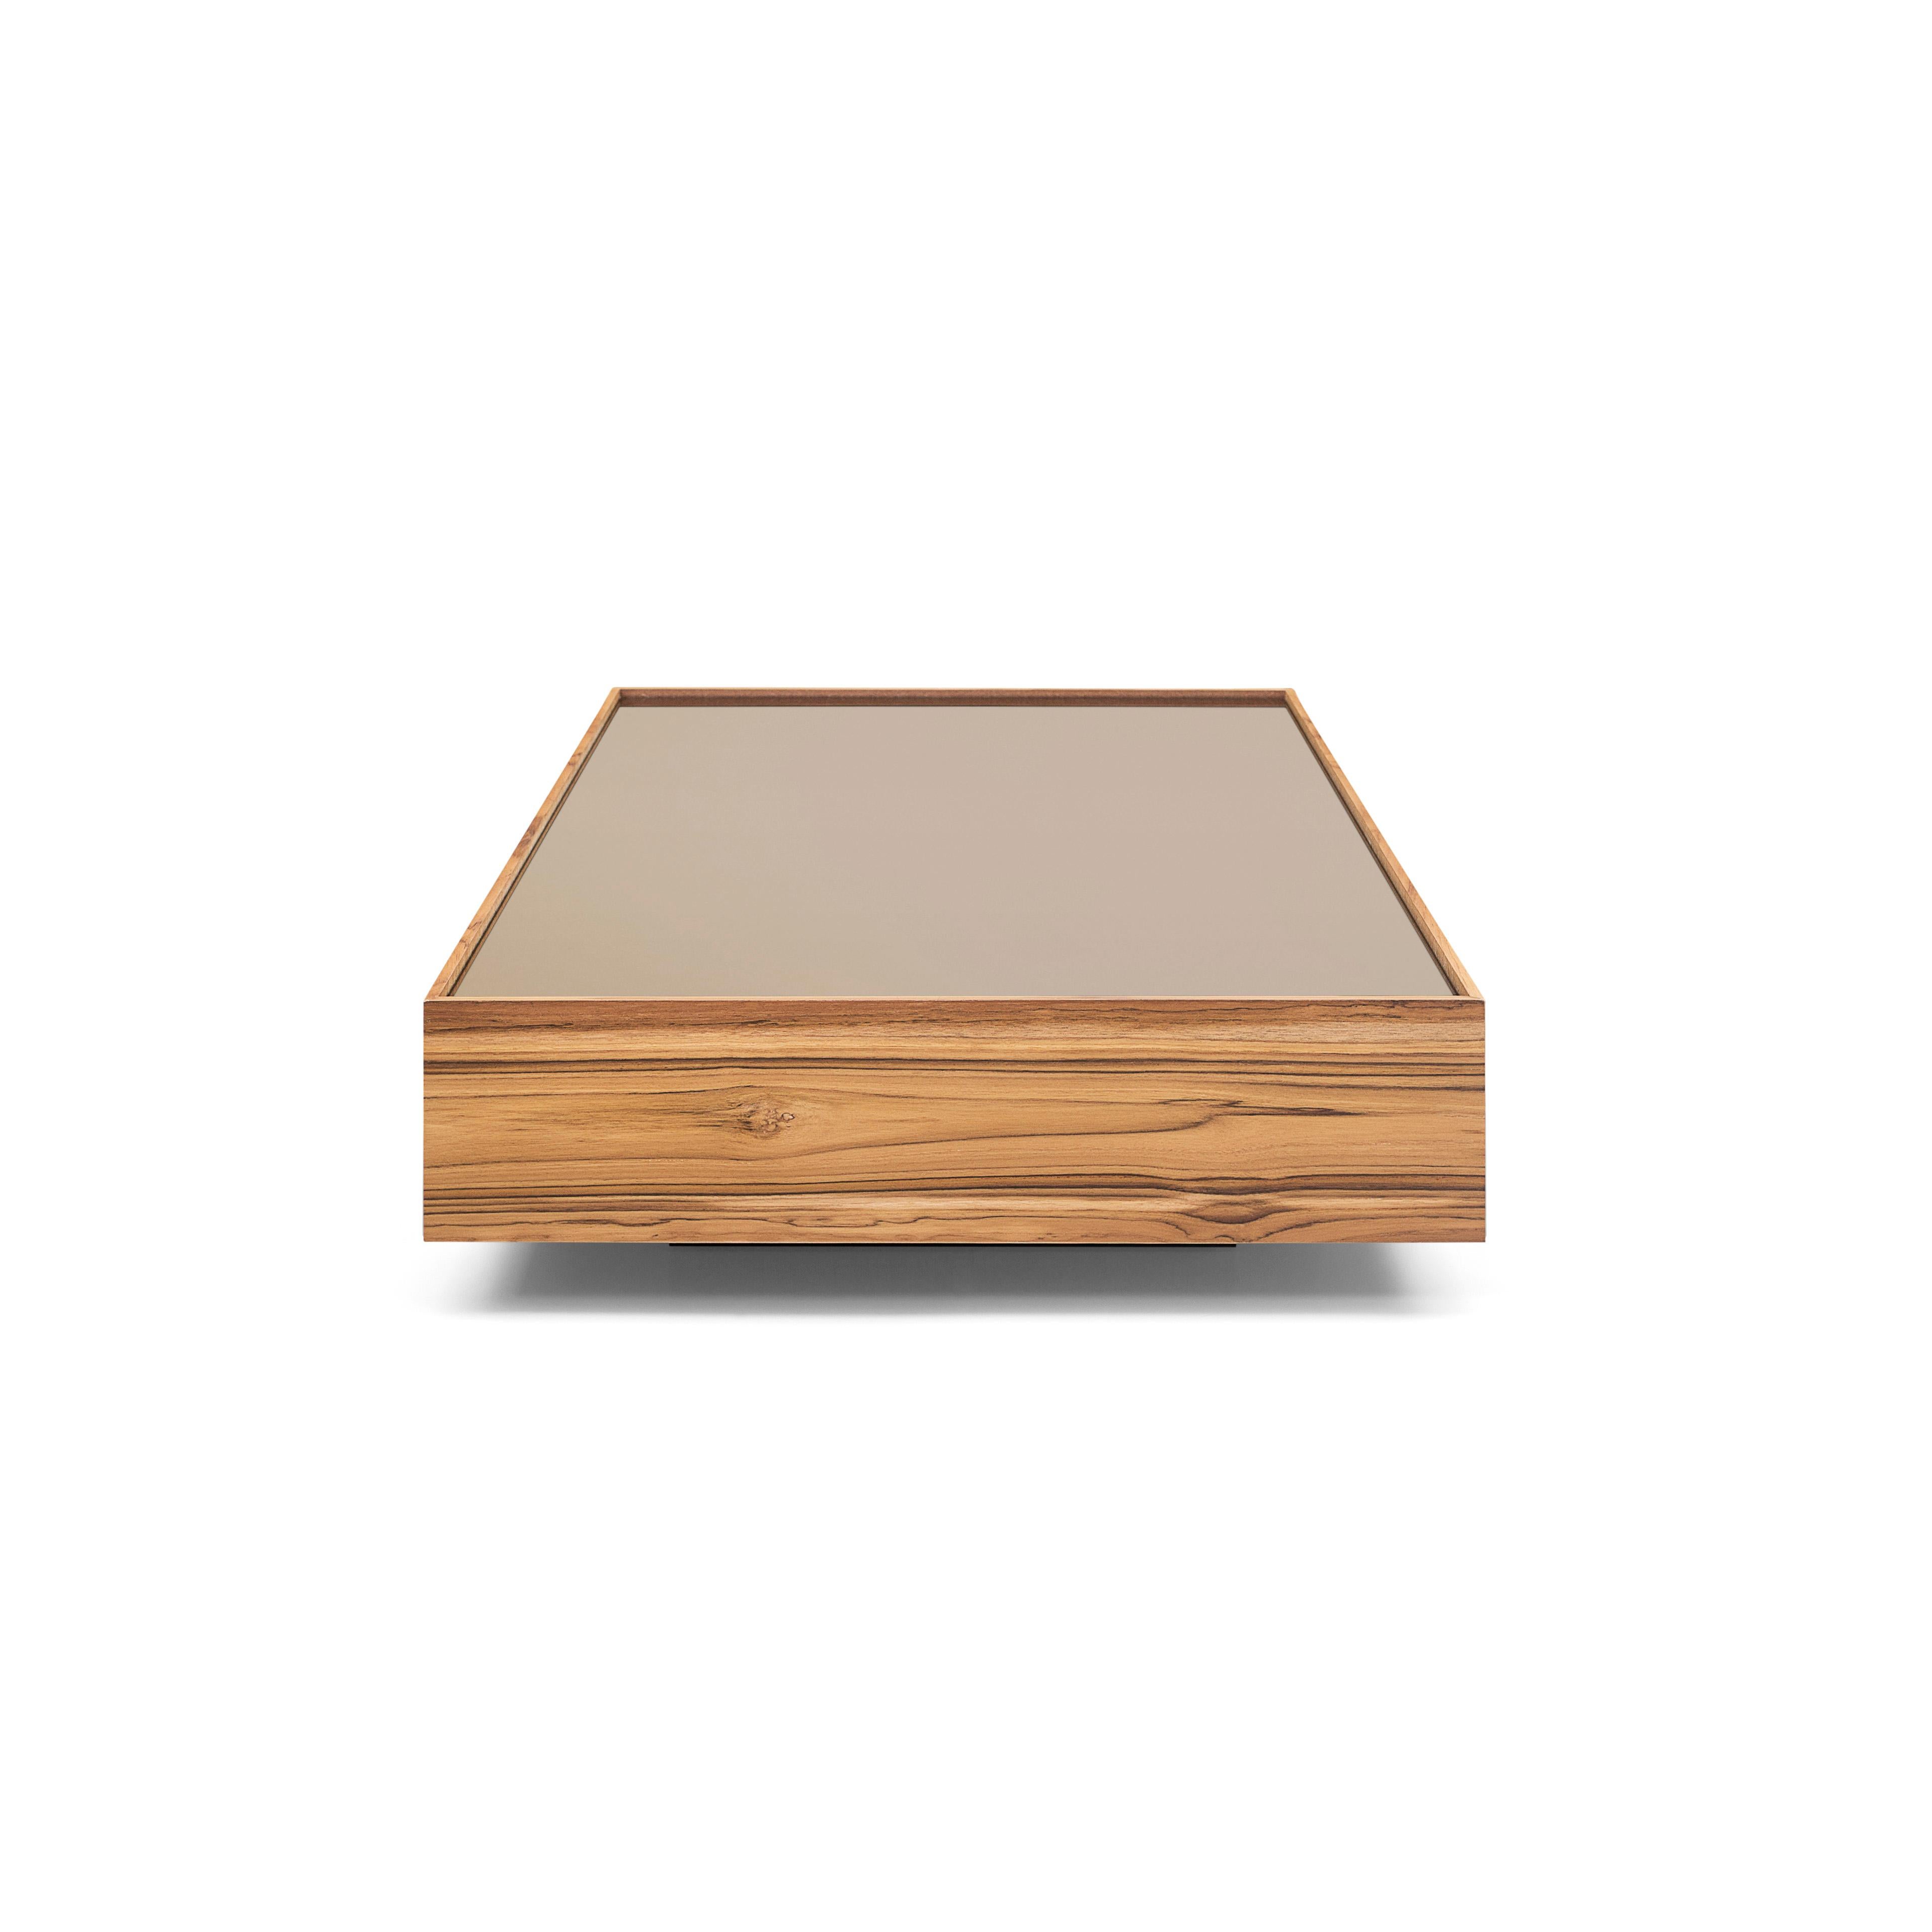 The Arc rectangular coffee table, featuring a beautiful teak wood frame combined with an elegant high-styled bronze glass top, is another perfect Uultis addition to anyone's home. Our Brazilian team at Uultis designed this coffee table having in